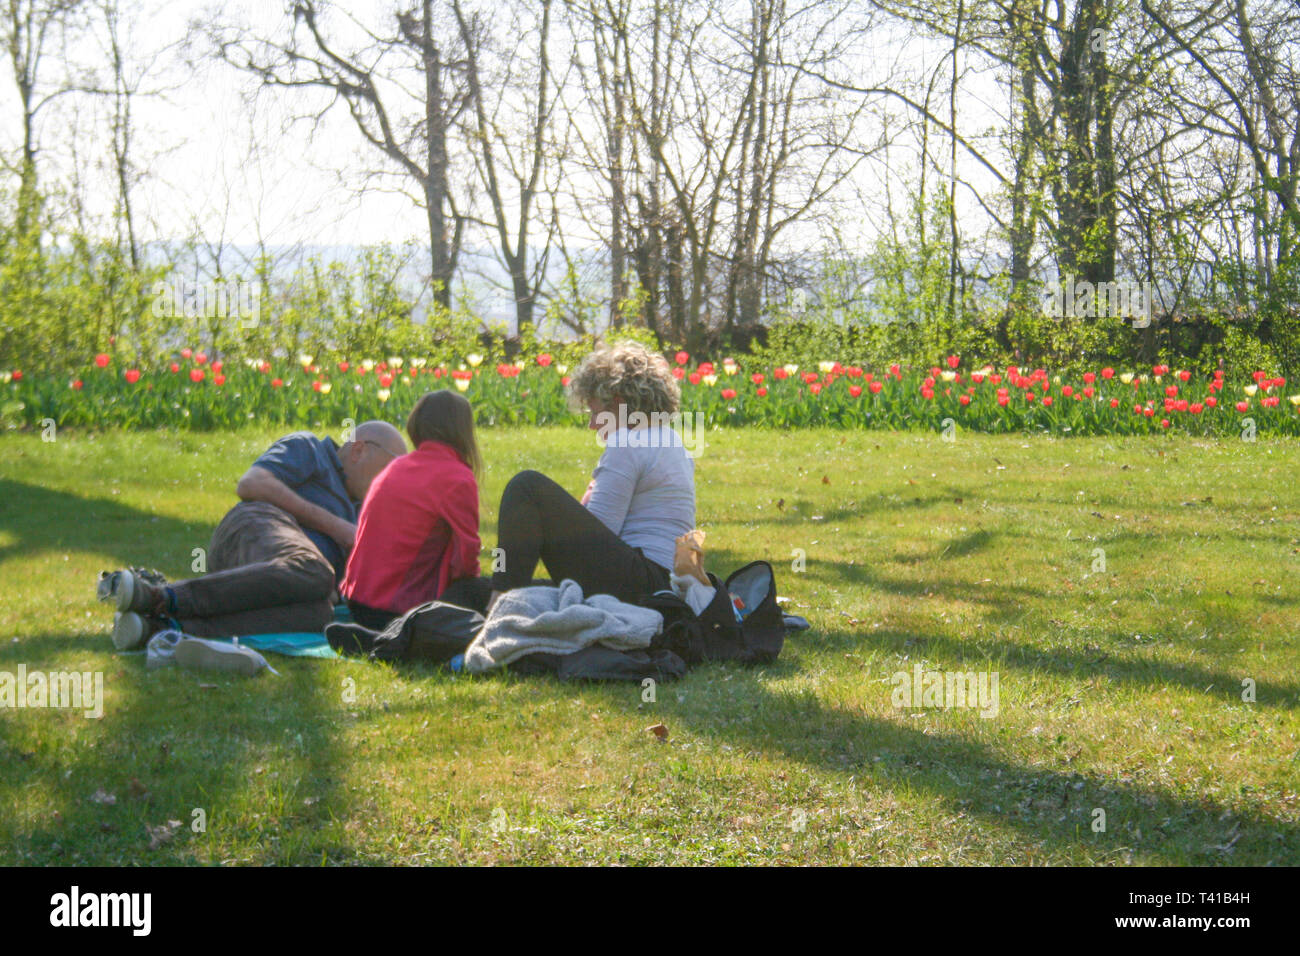 People relaxing on the green grass enjoying nature among beautiful white, pink and purple tulips with green leaves, blurred background Stock Photo